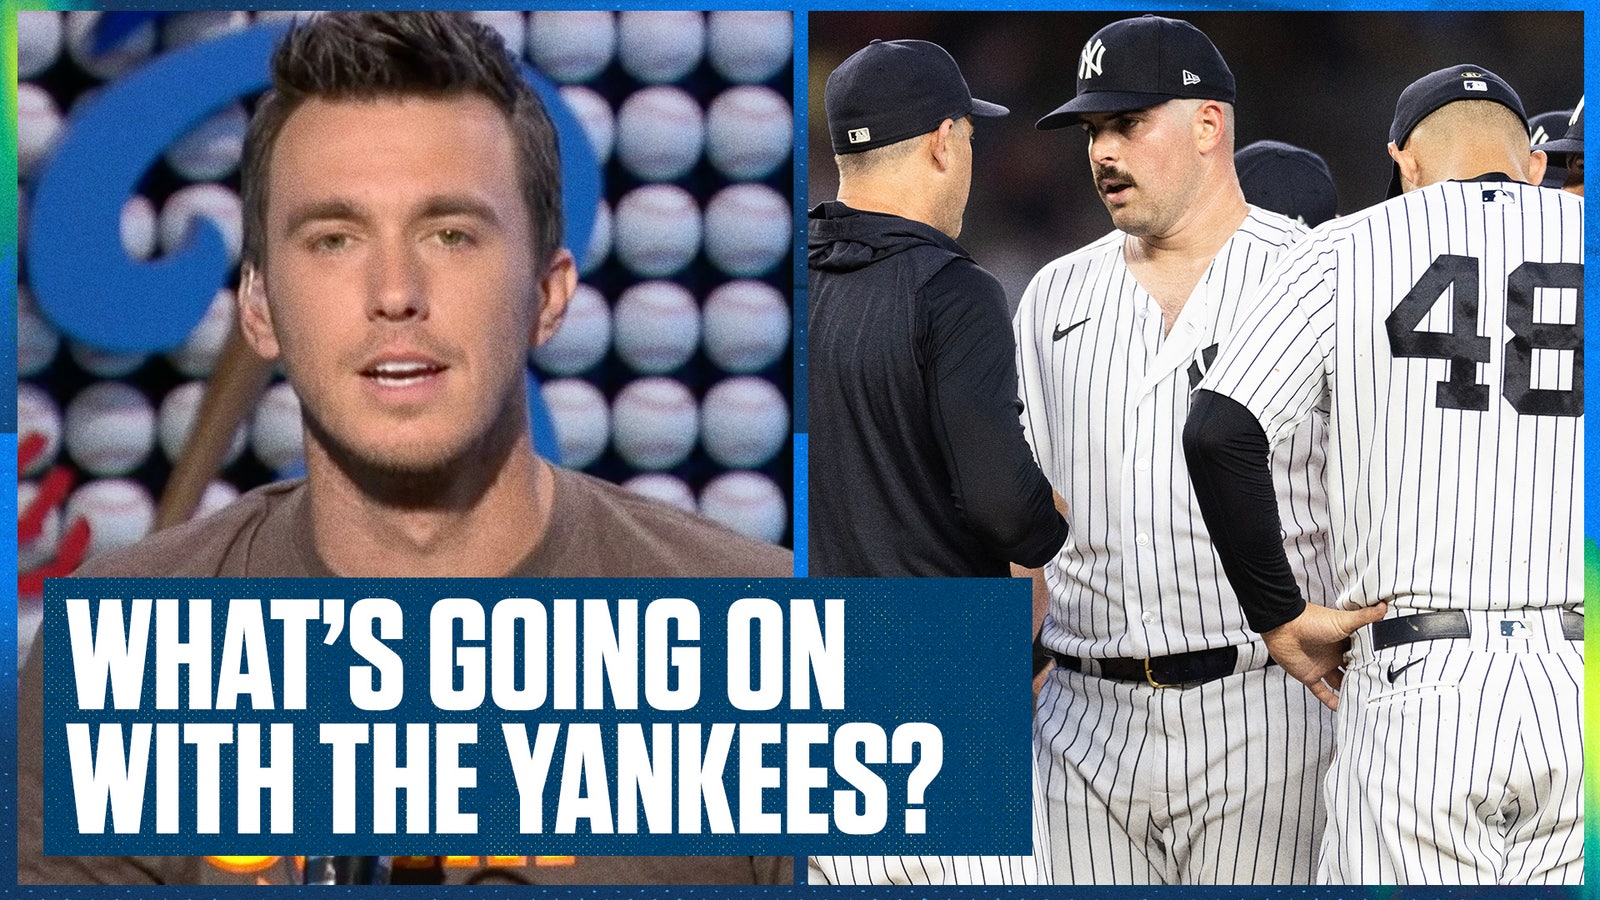 What is happening with the New York Yankees? 